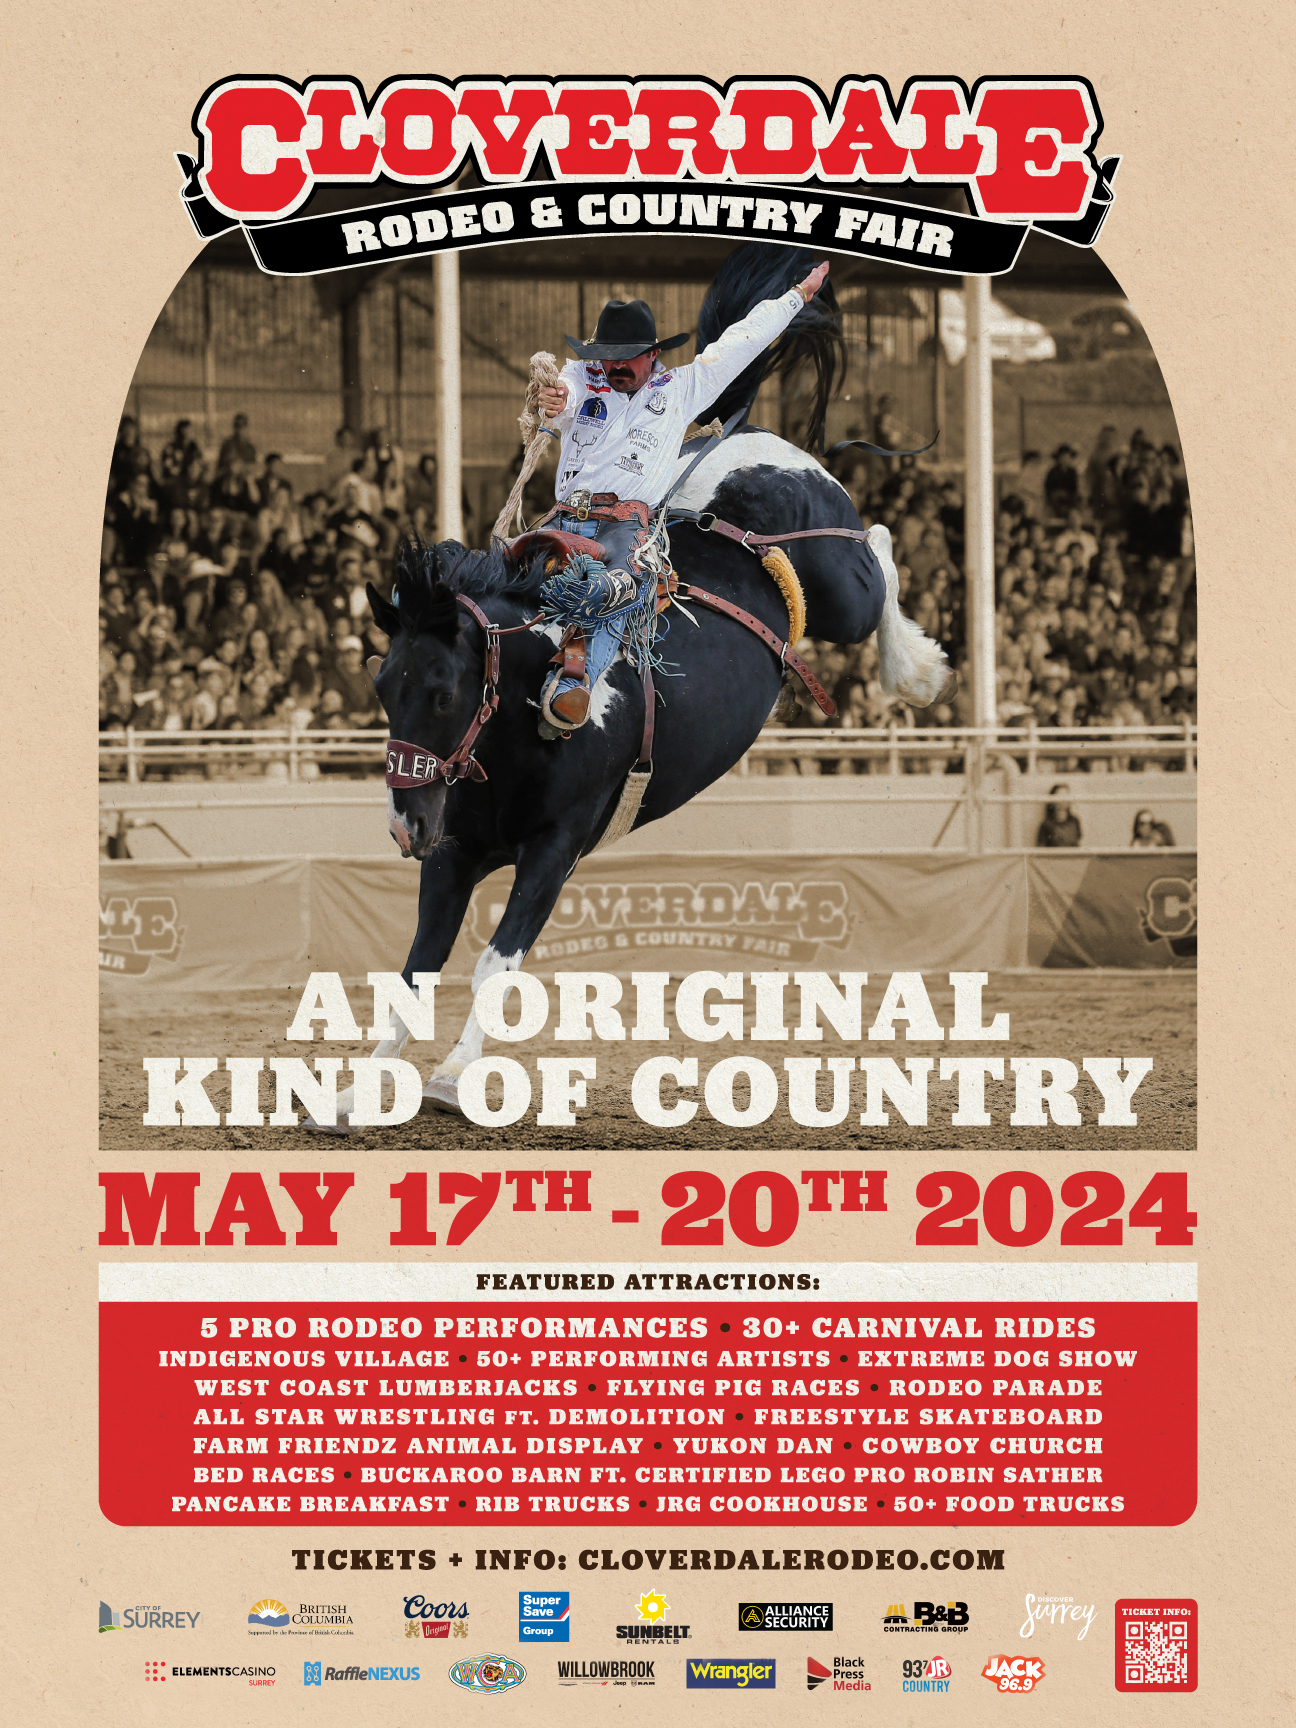 The official 2024 Cloverdale Rodeo and Country Fair Poster